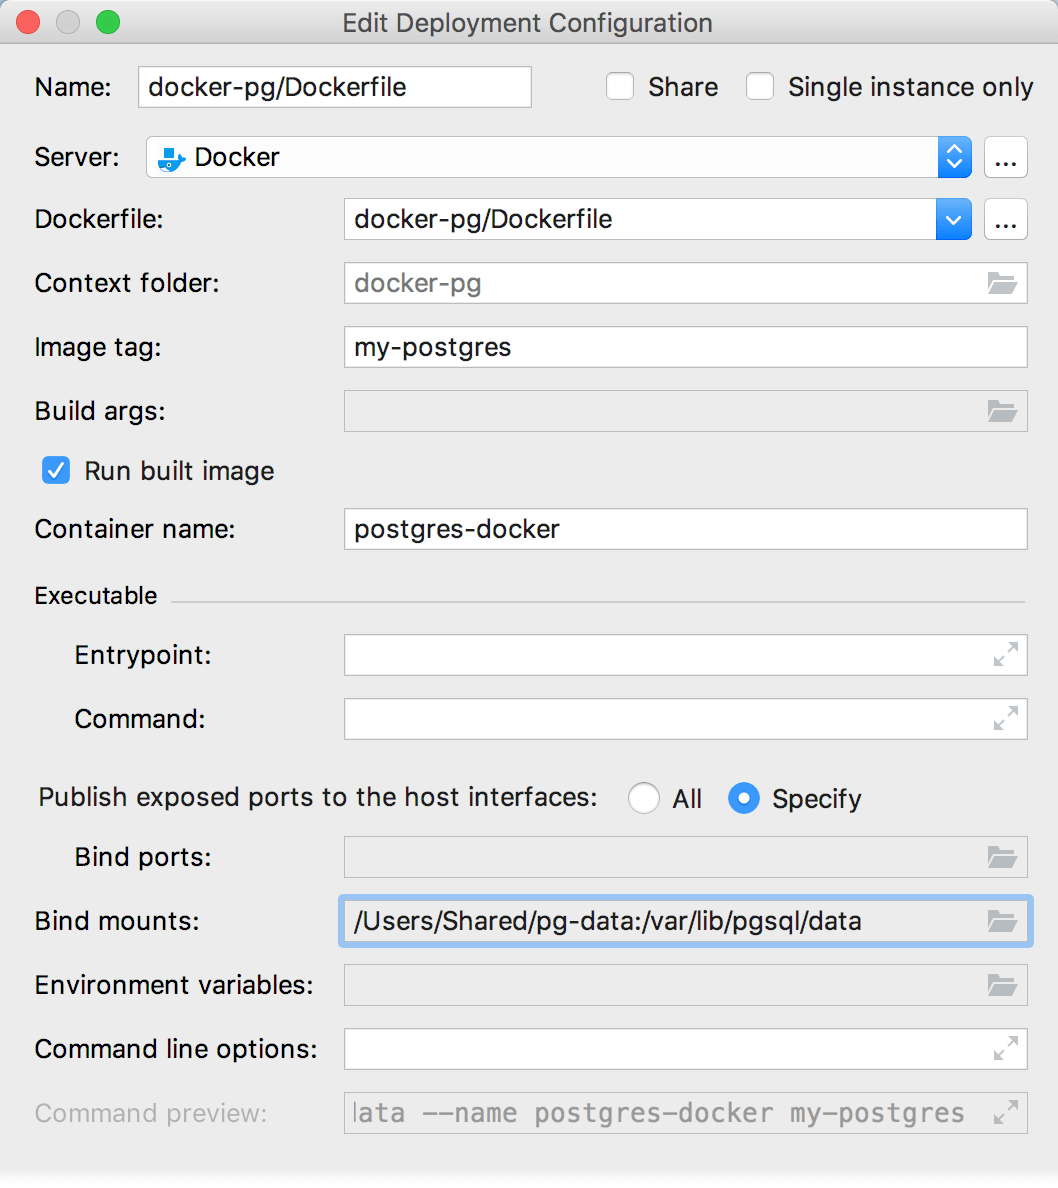 The Edit Deployment Configuration dialog with bind mounts